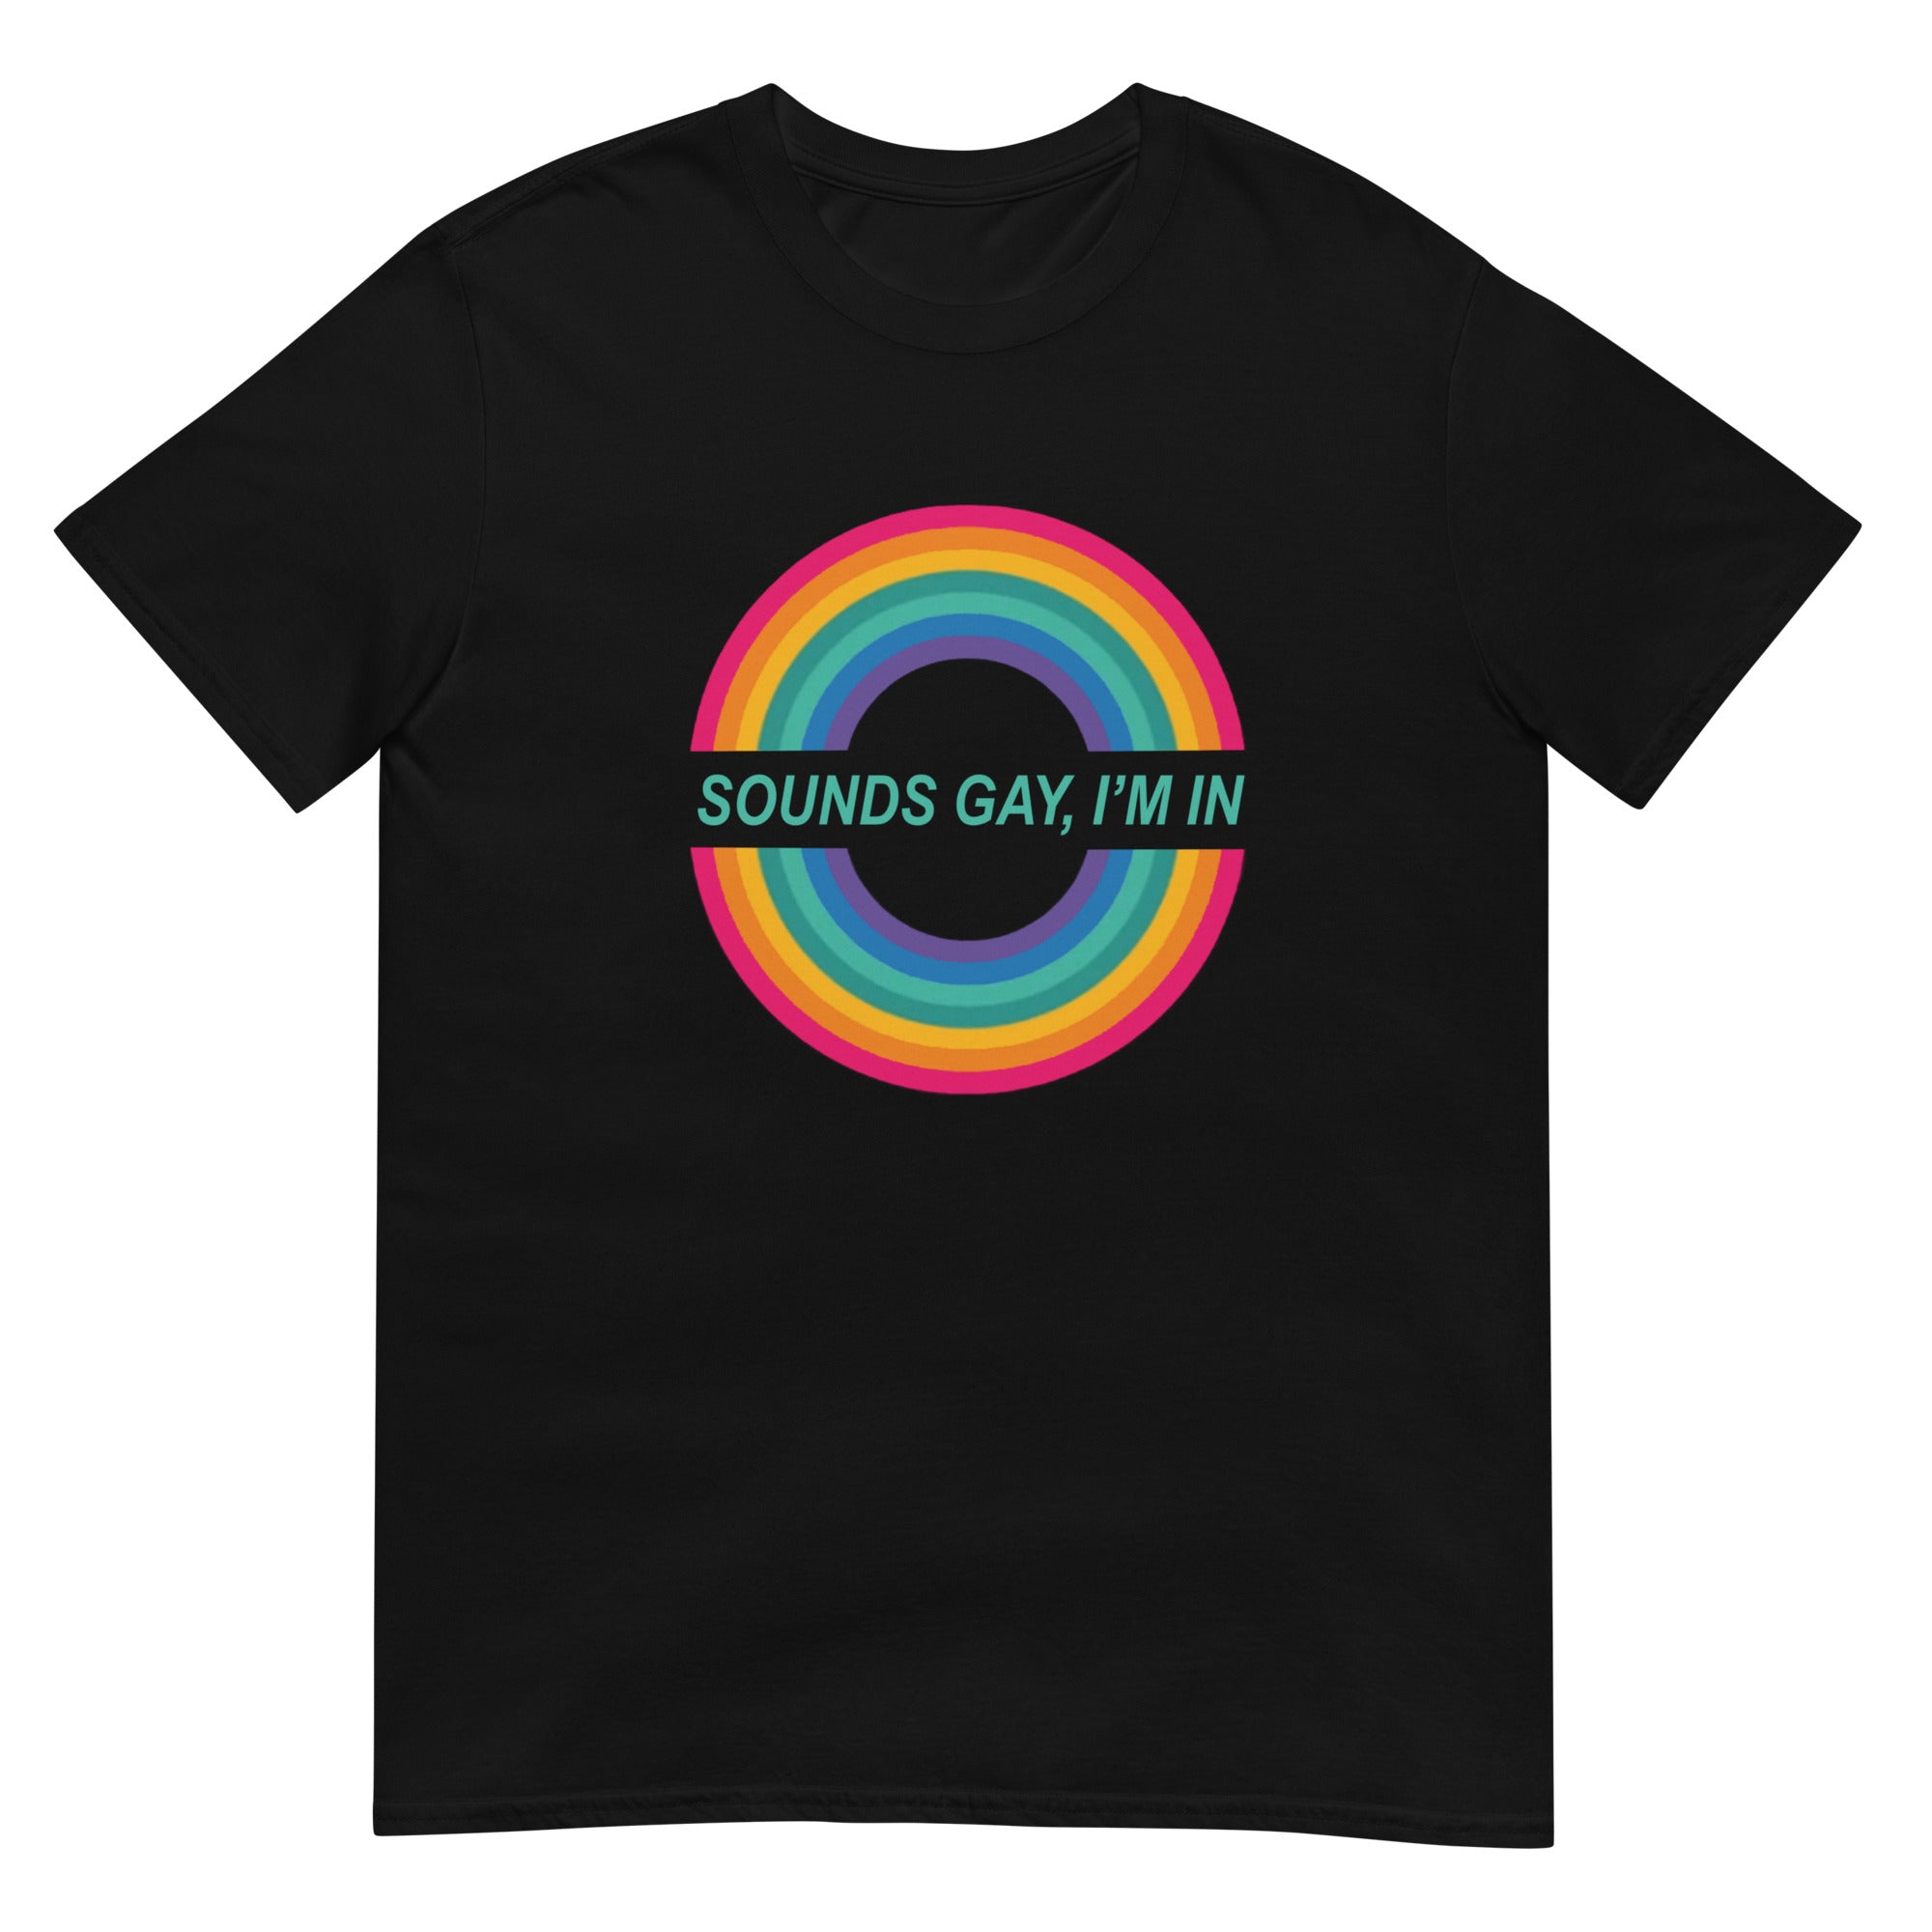 LGBT_Pride-Rainbow Circle T Shirt Sounds Gay I'm In - Rose Gold Co. Shop